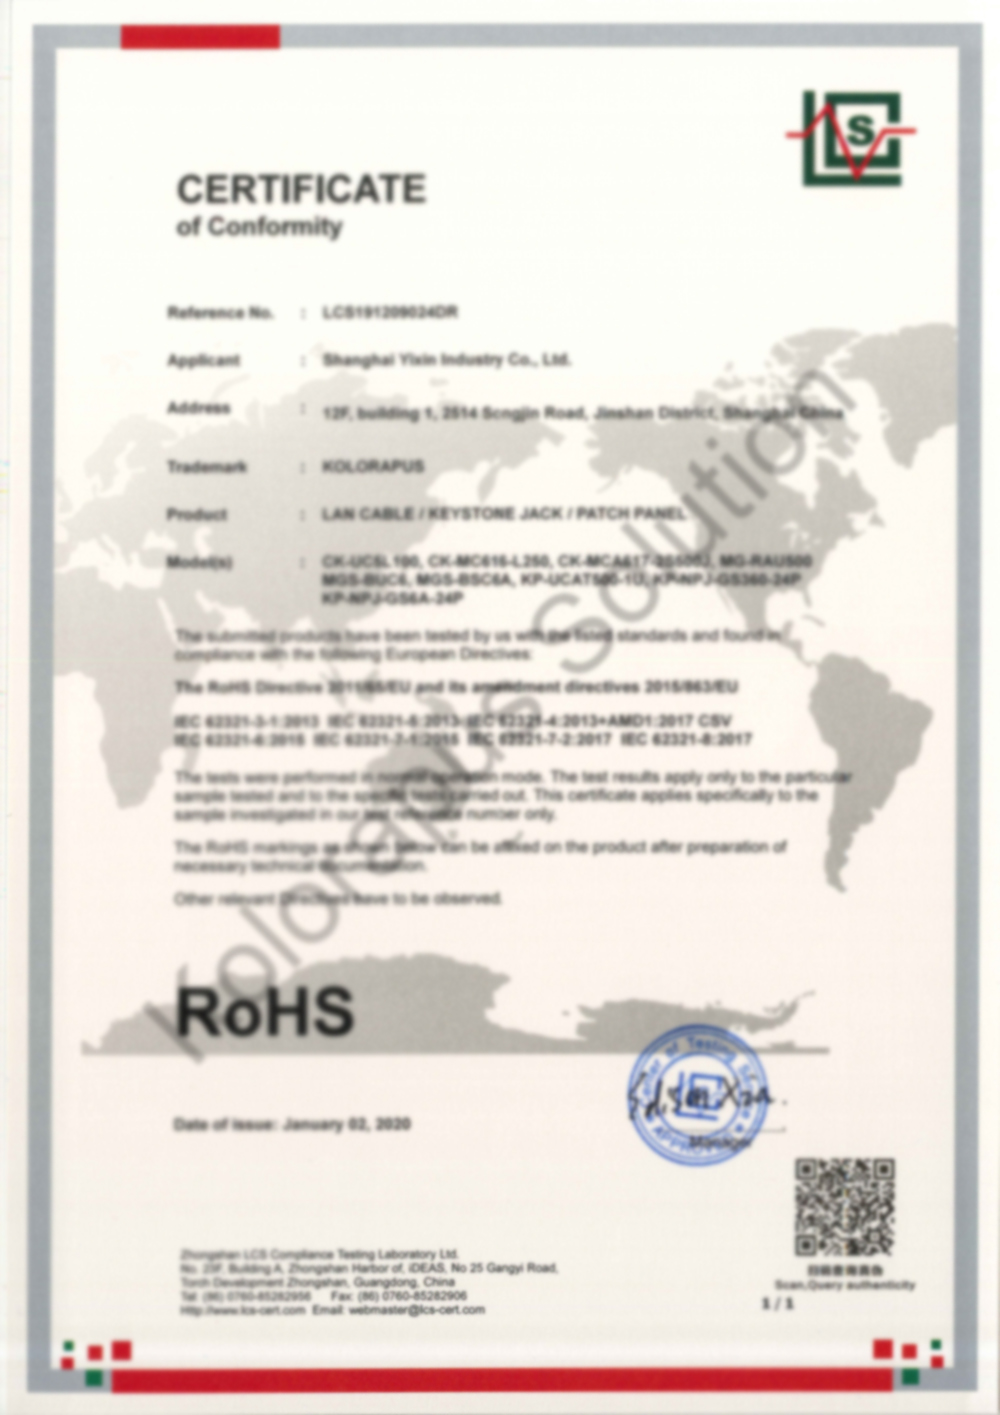 Network Cable (ROHS Certificate)